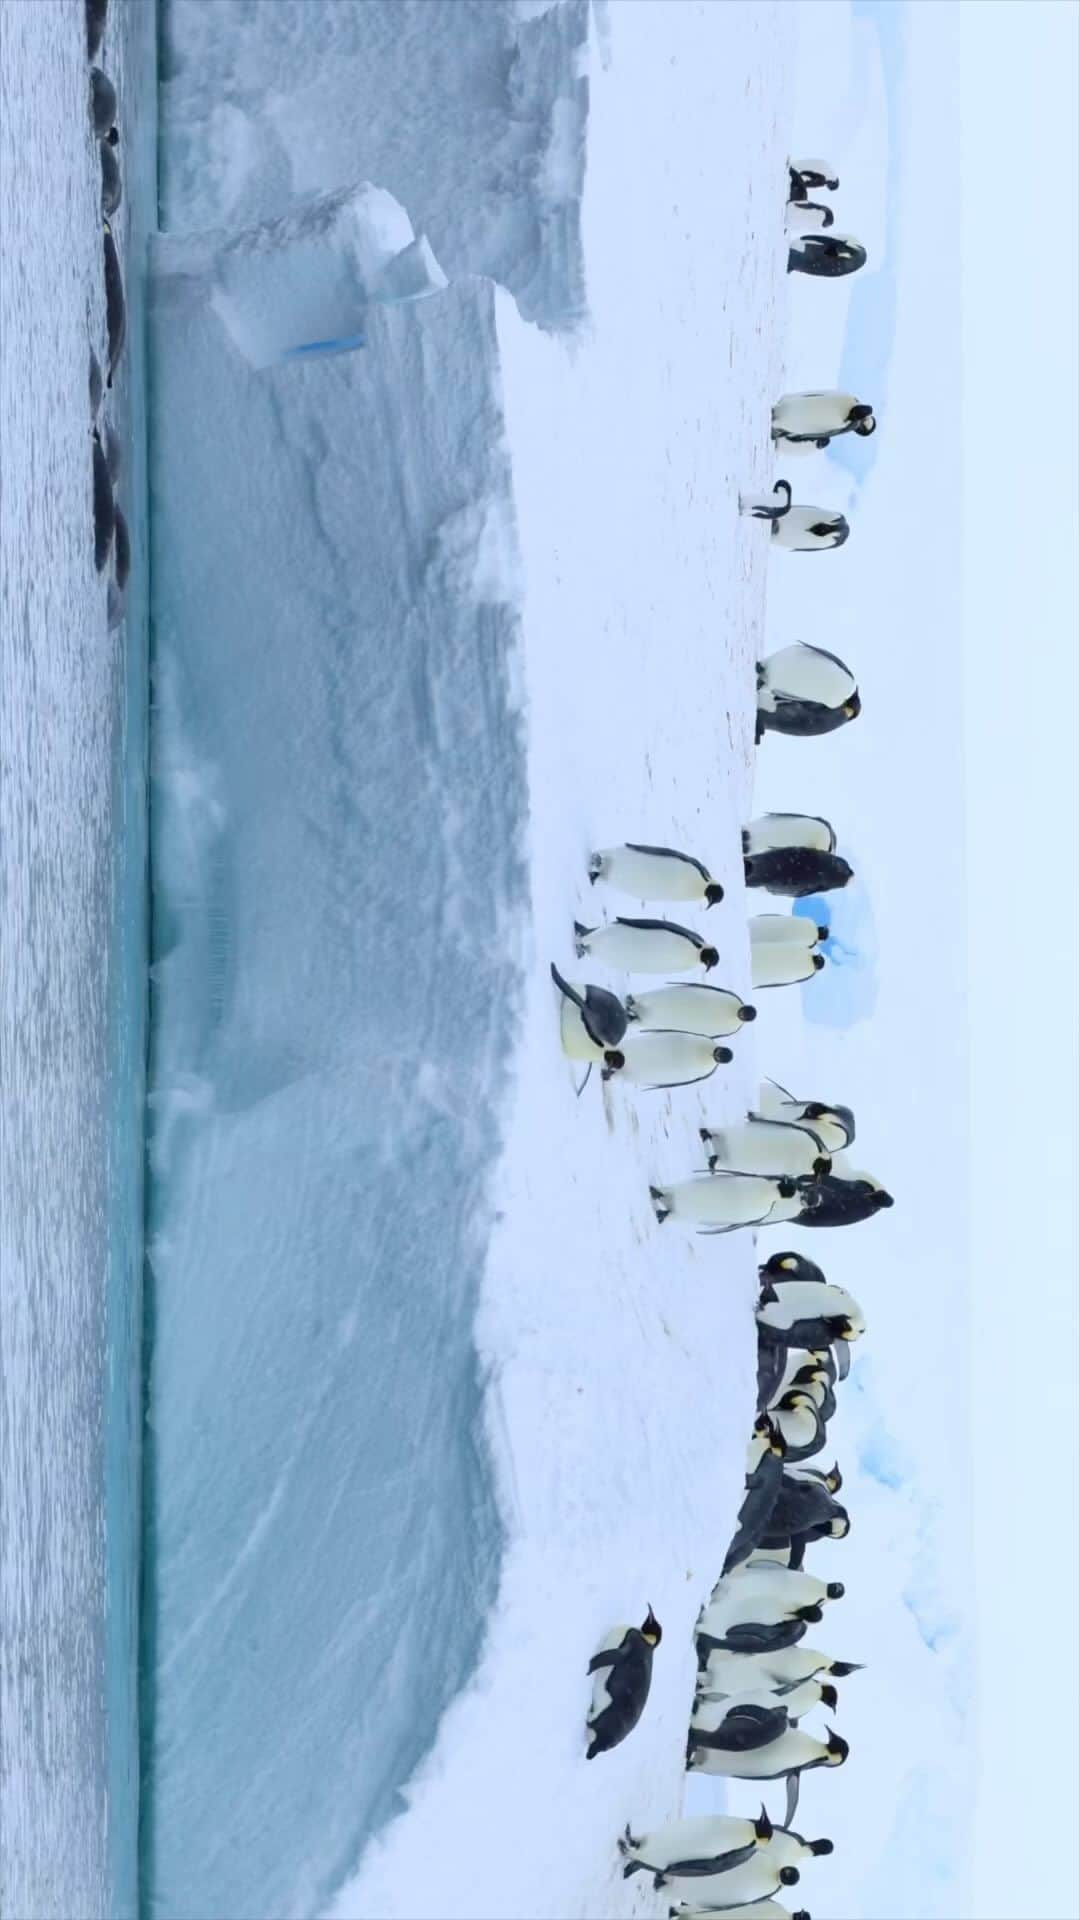 Tim Lamanのインスタグラム：「Video by @TimLaman and @RussLaman.  Emperor Penguins leap off and back on an iceberg in Antarctica.  One of the highlights of our recent trip with @natgeoexpeditions.  But why do you think they are doing this?? Follow us for more wildlife adventures. #emperorpenguin #penguin #antarctica #birds #birdphotography」